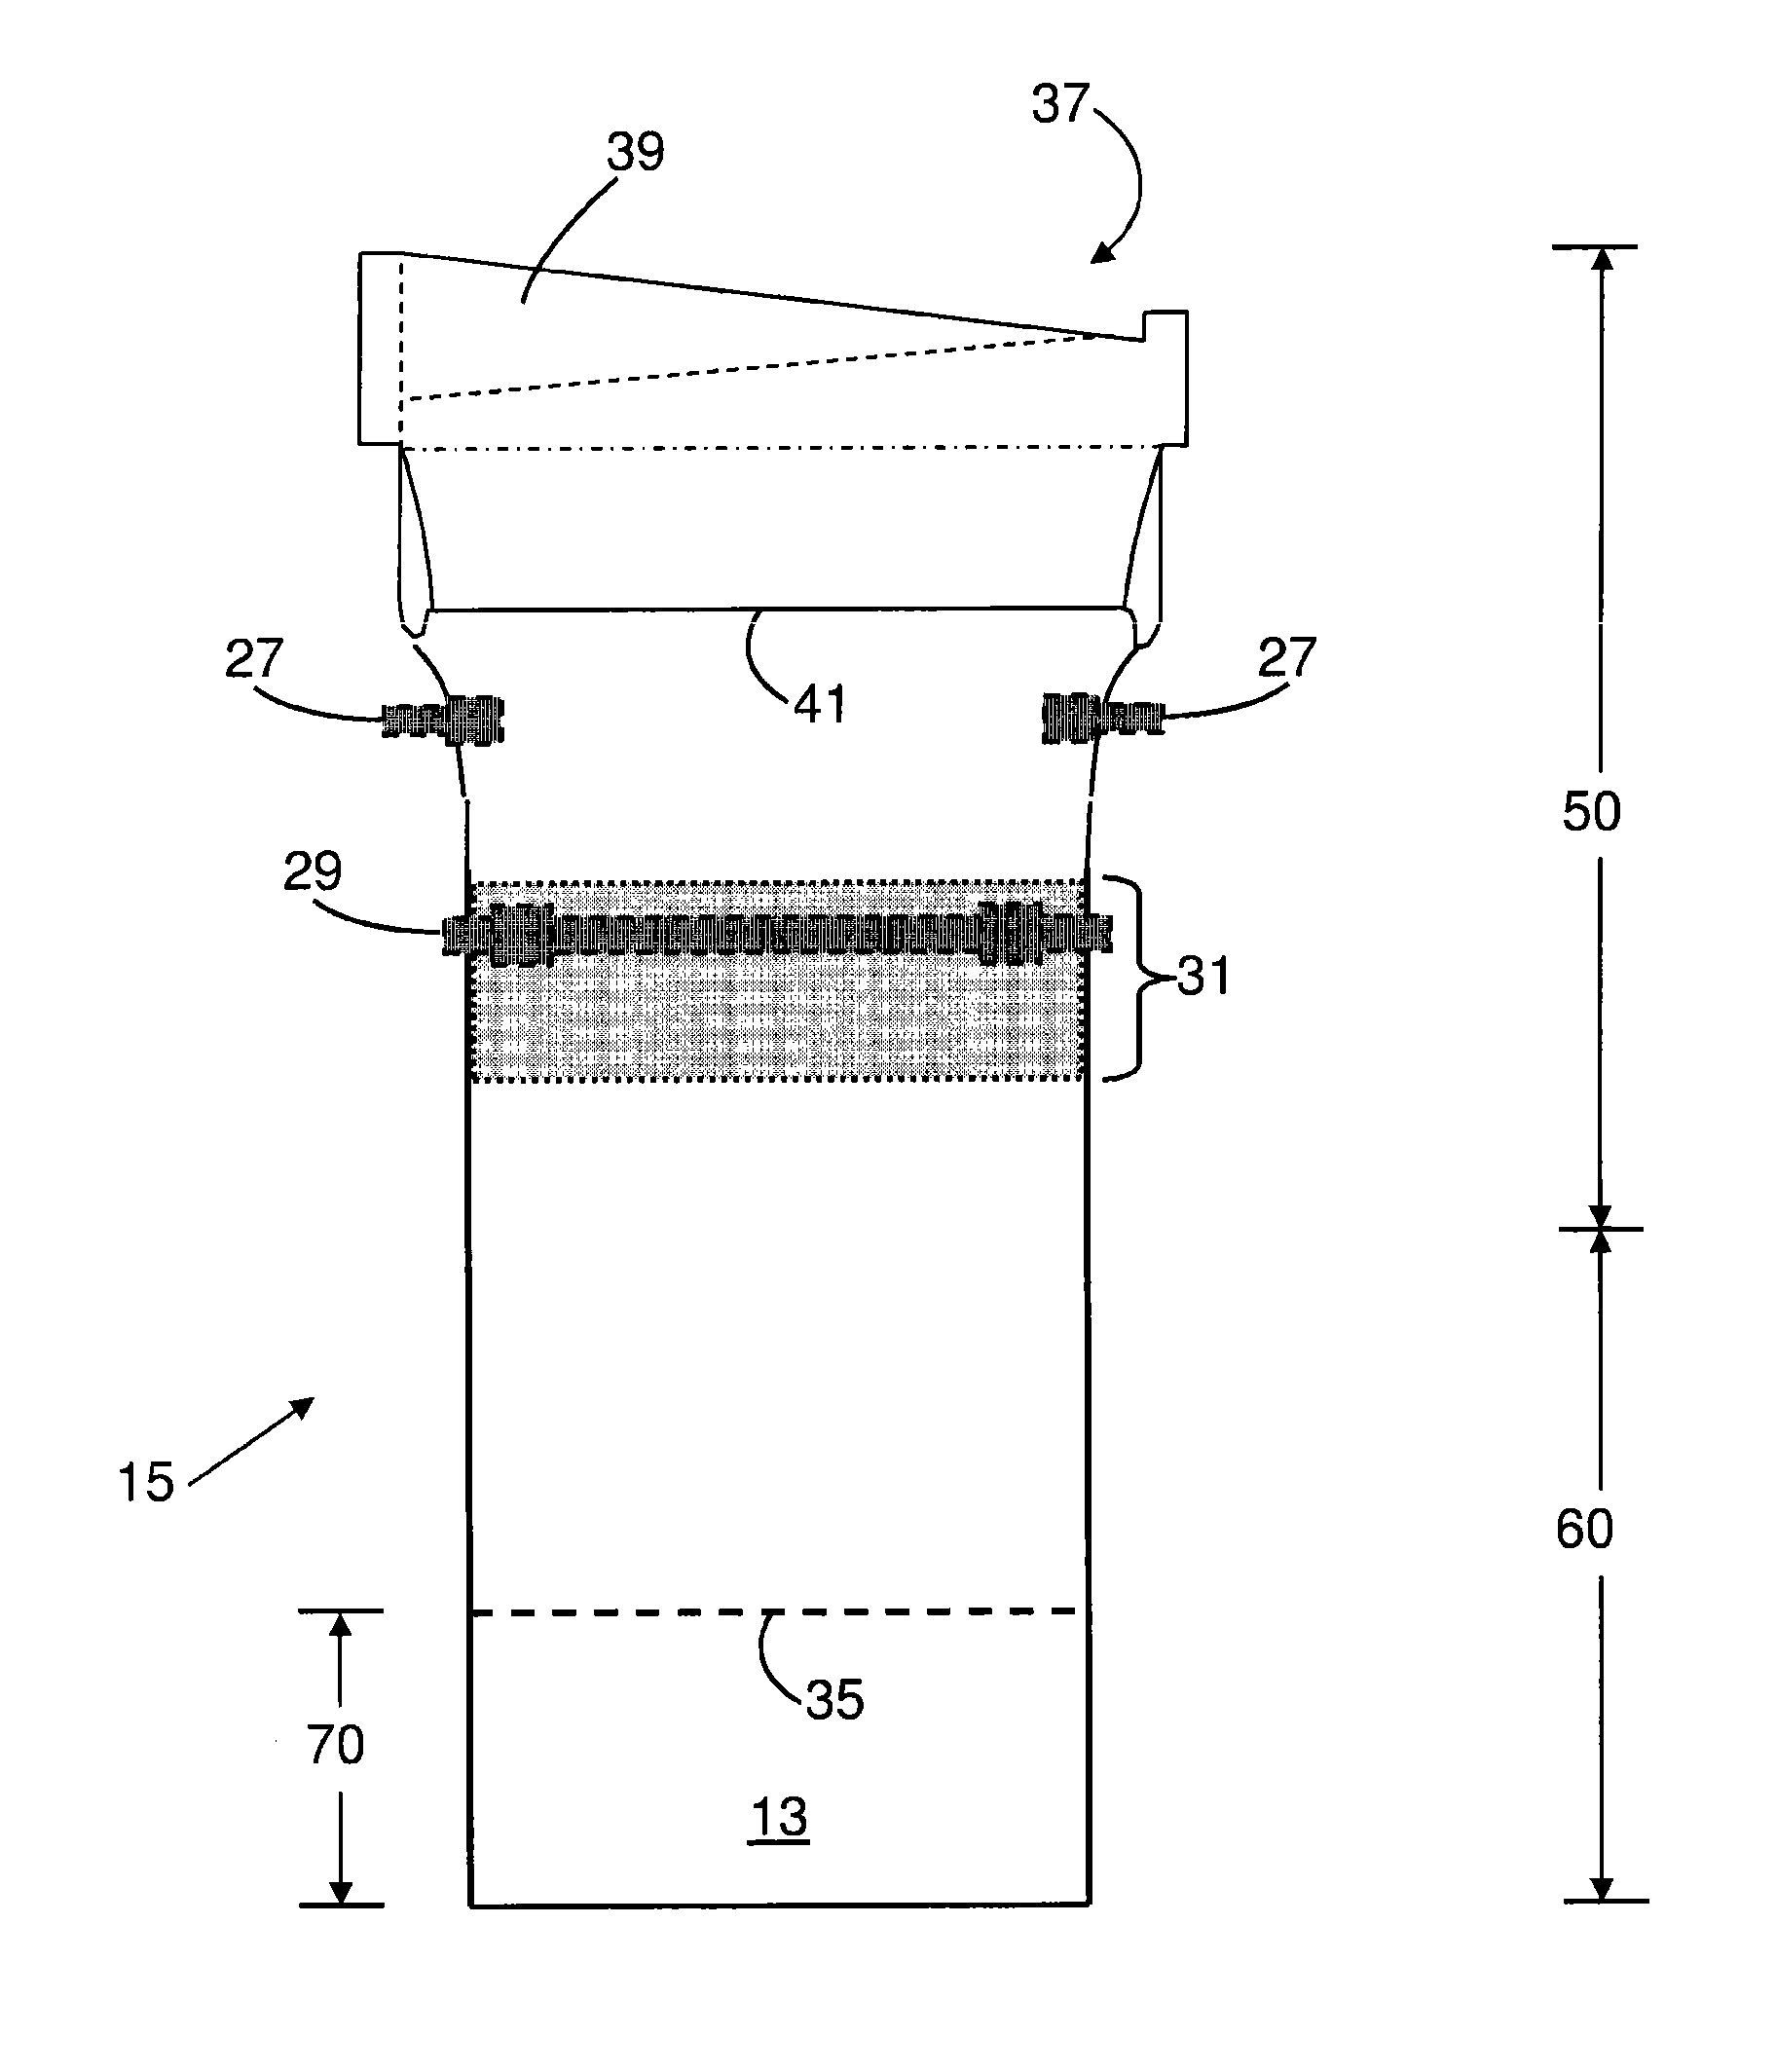 Thermal control of the bead portion of a glass ribbon